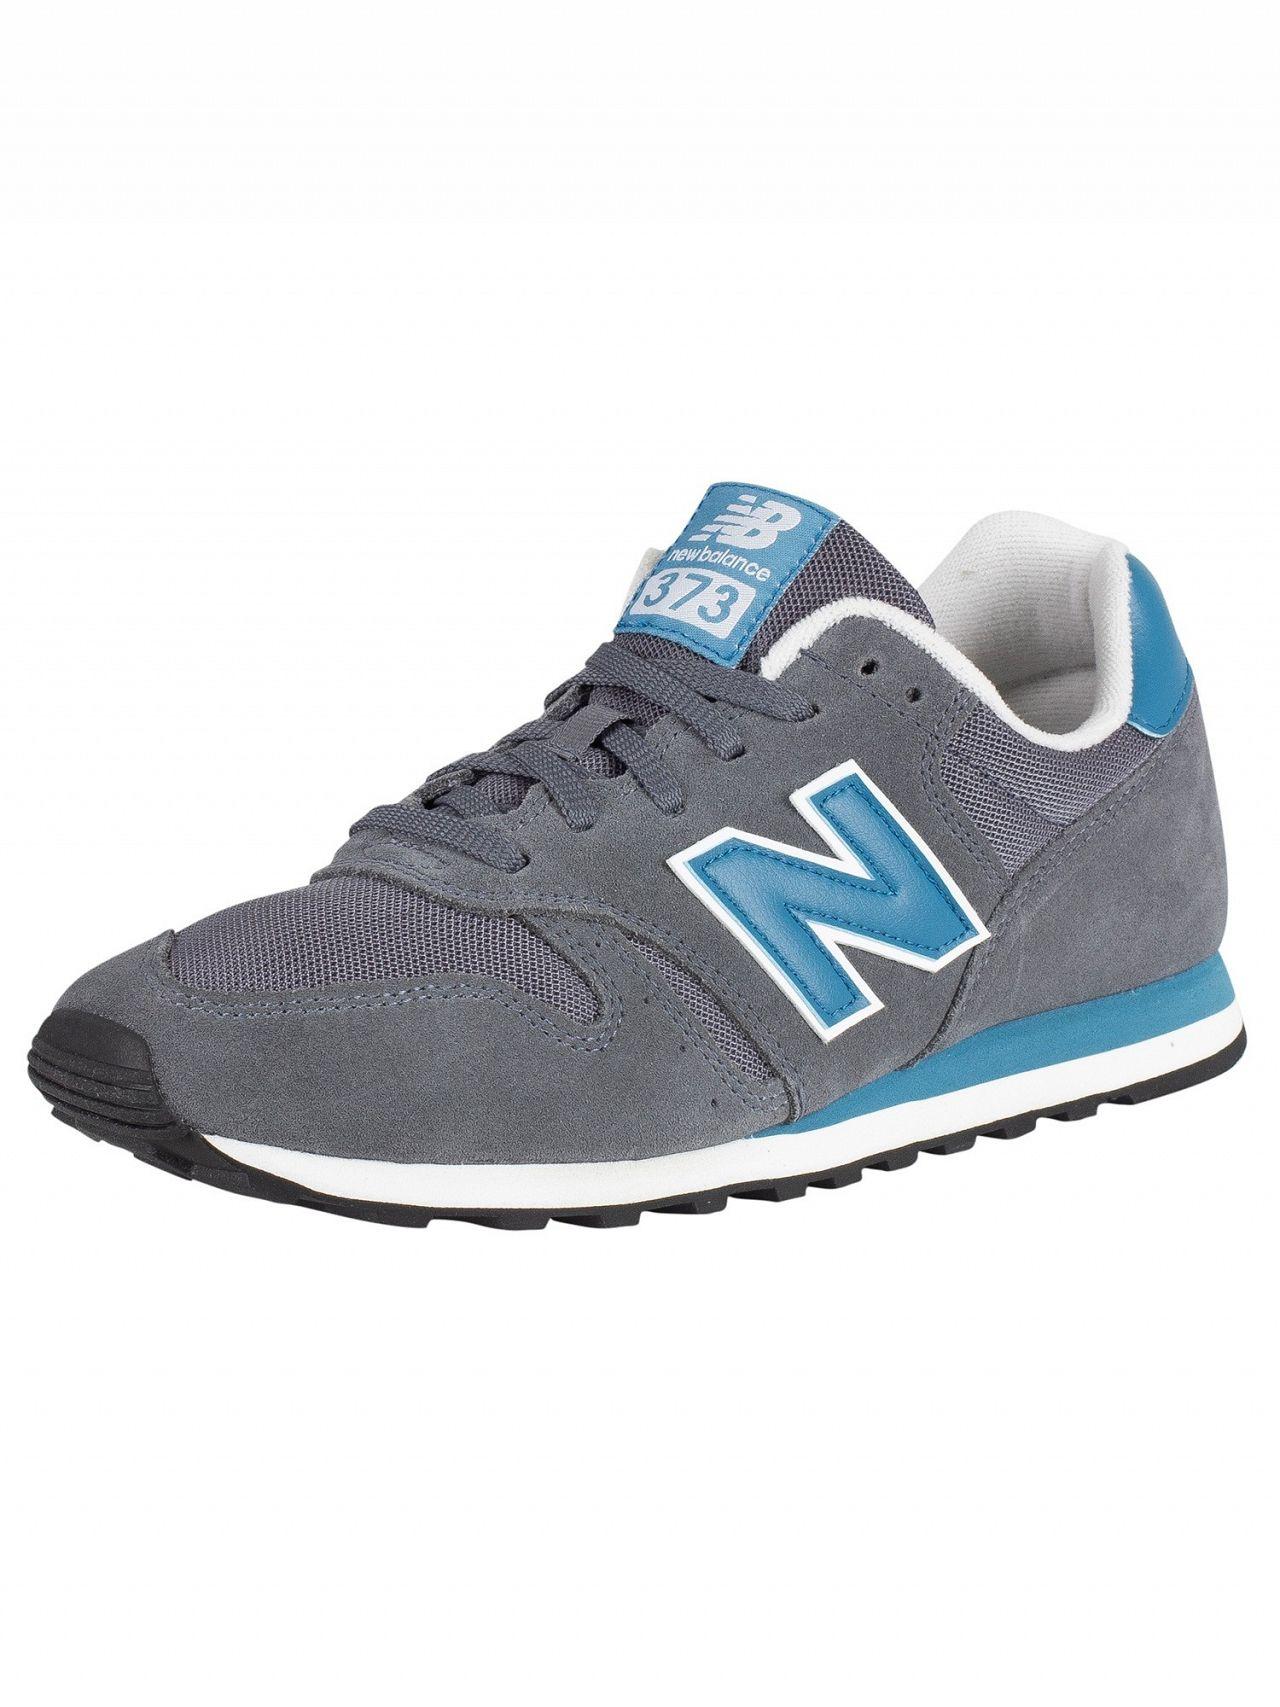 New Balance Grey/blue 373 Suede Trainers in Grey for Men - Lyst